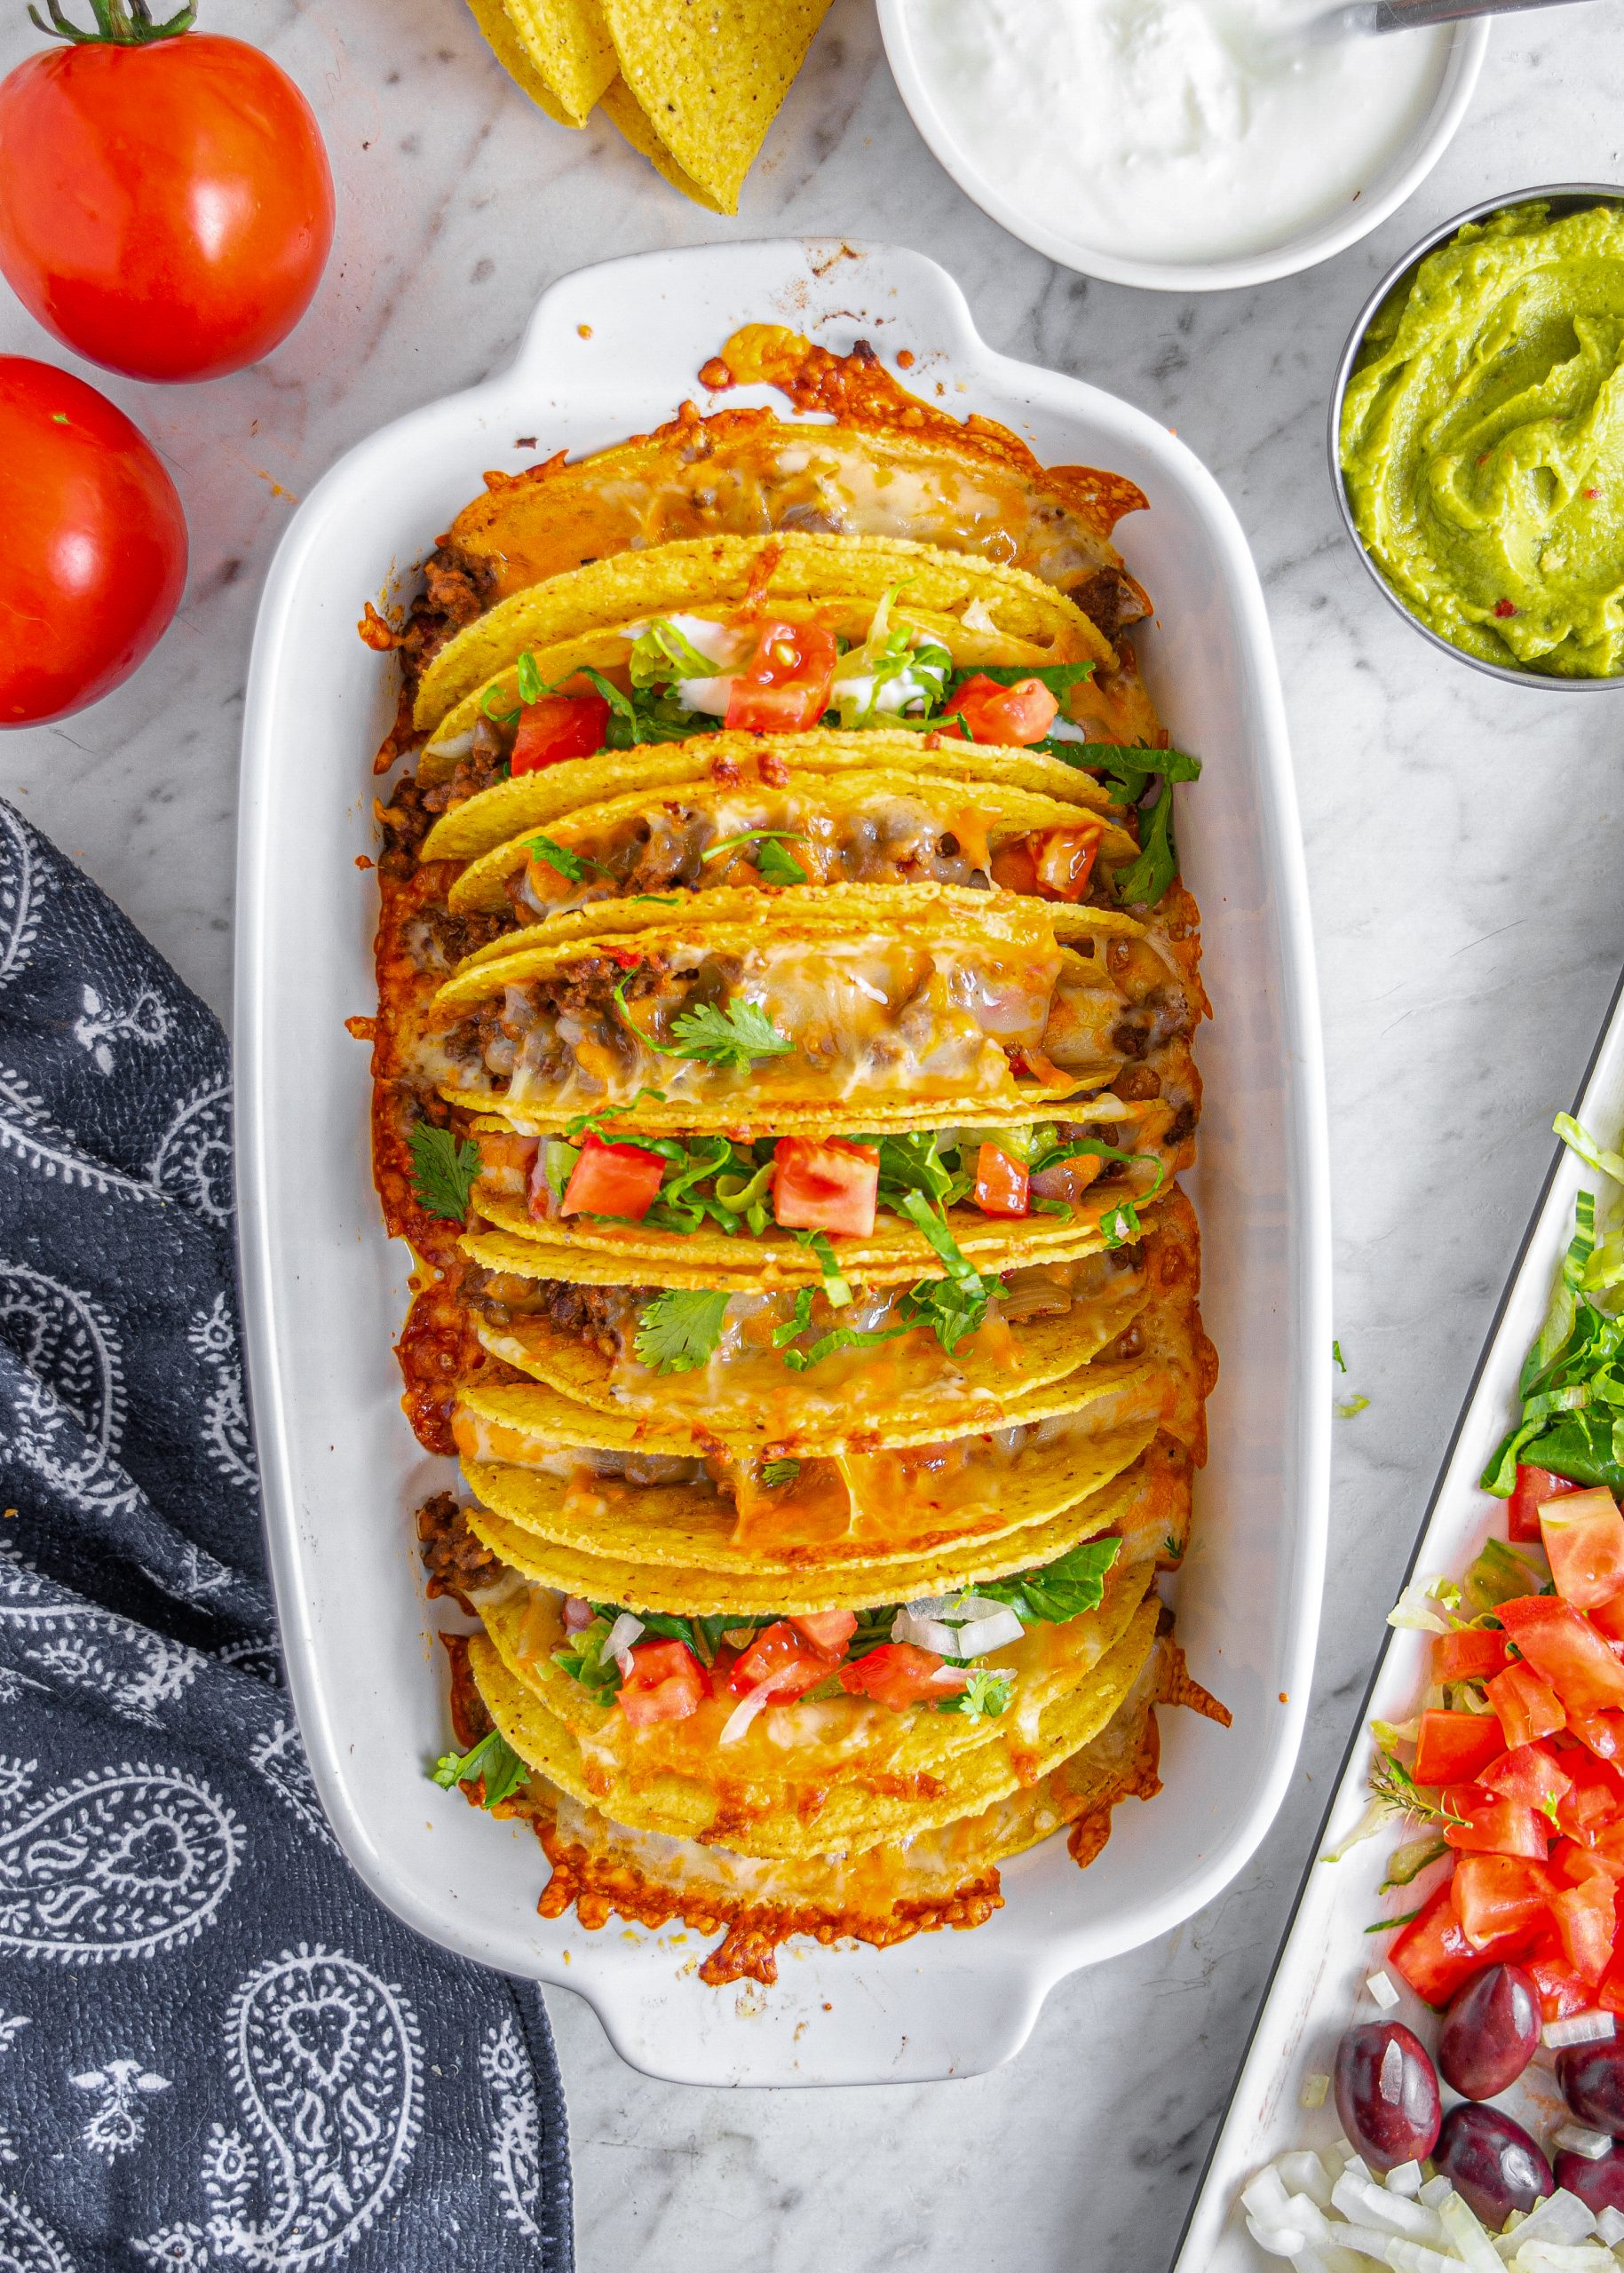 baked tacos, oven baked tacos, tacos in the oven, Taco Oven Bake